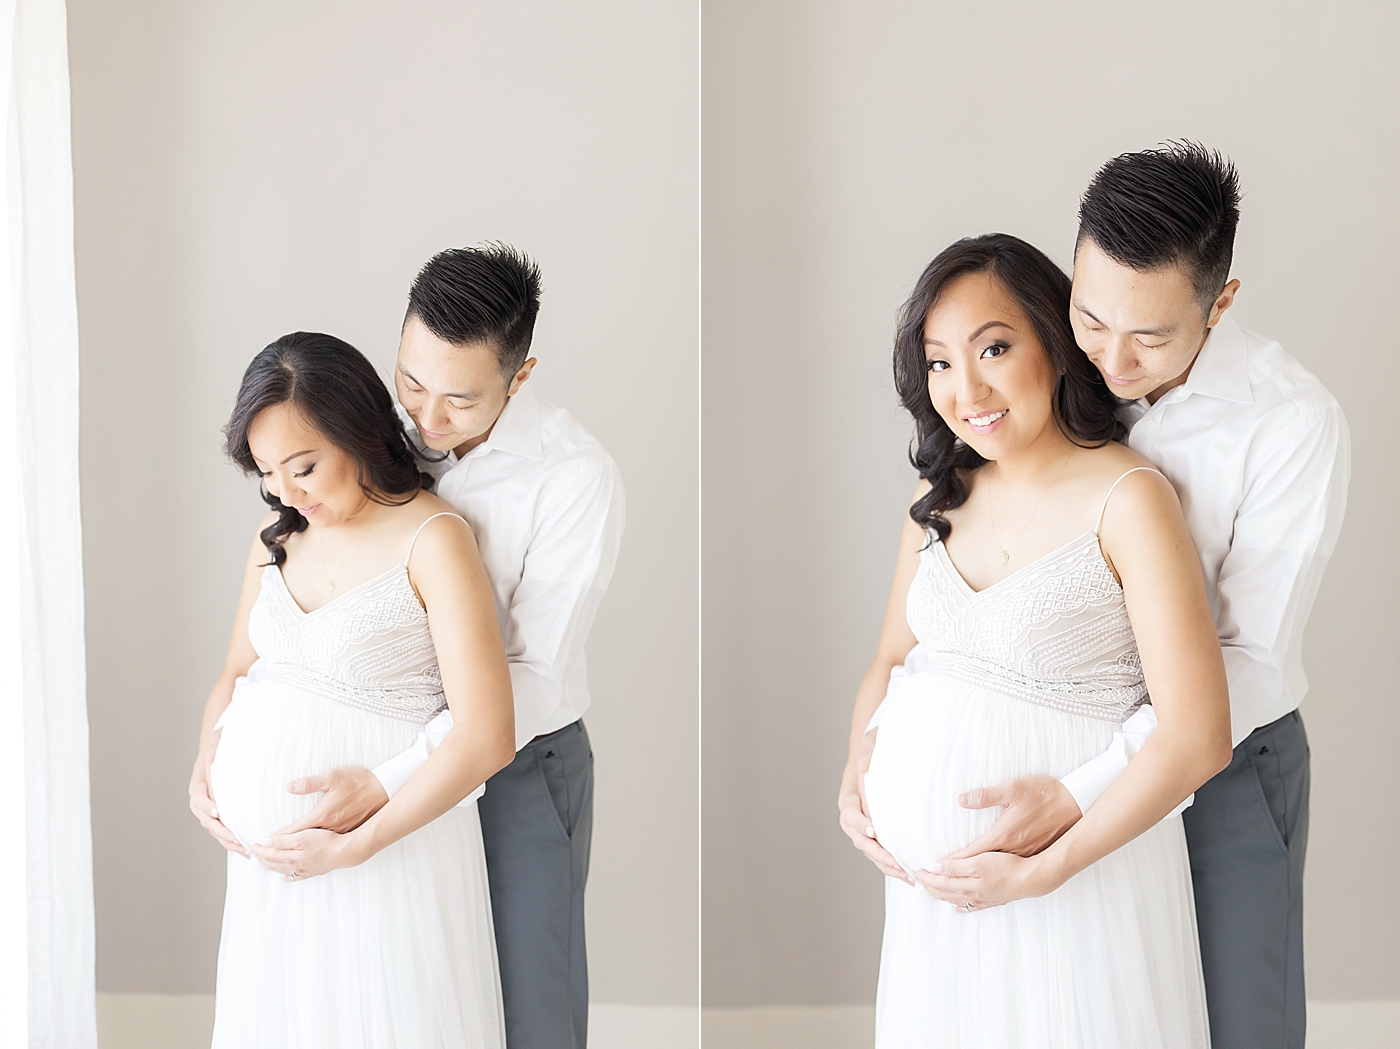 Studio maternity session in The Heights with Fresh Light Photography